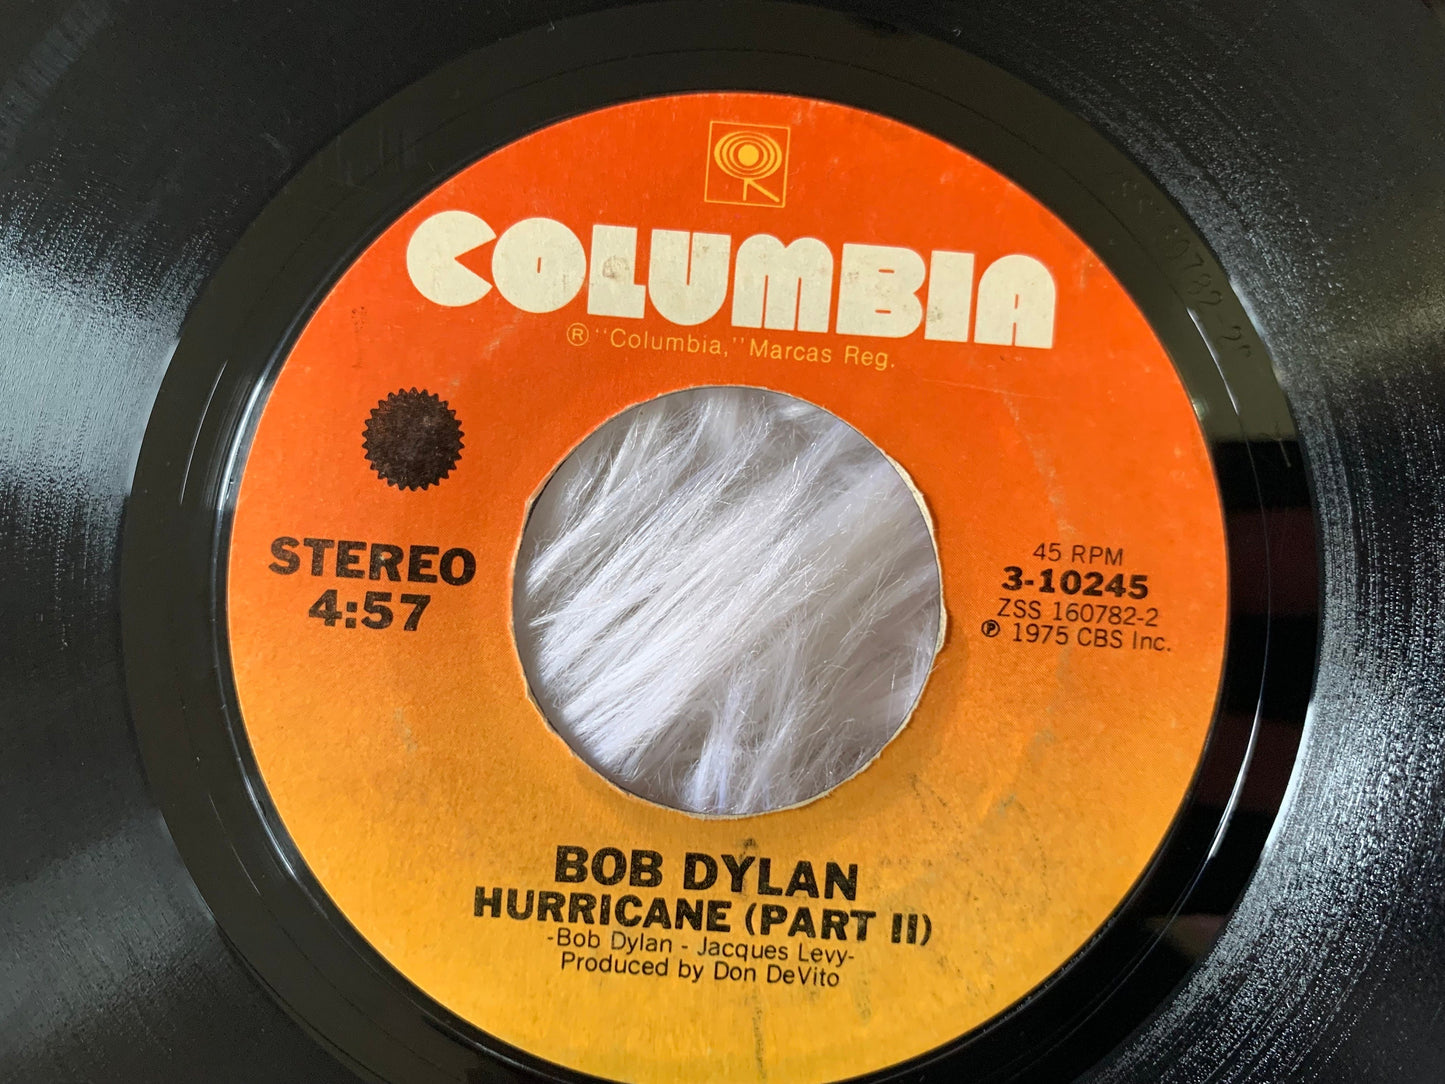 Bob Dylan Hurricane (Part I and II) 1975 Columbia 3-10245 Vintage Vinyl Records 70's Bob Dylan Singles 45 RPM 7" Records, Hurricane 1 and 2